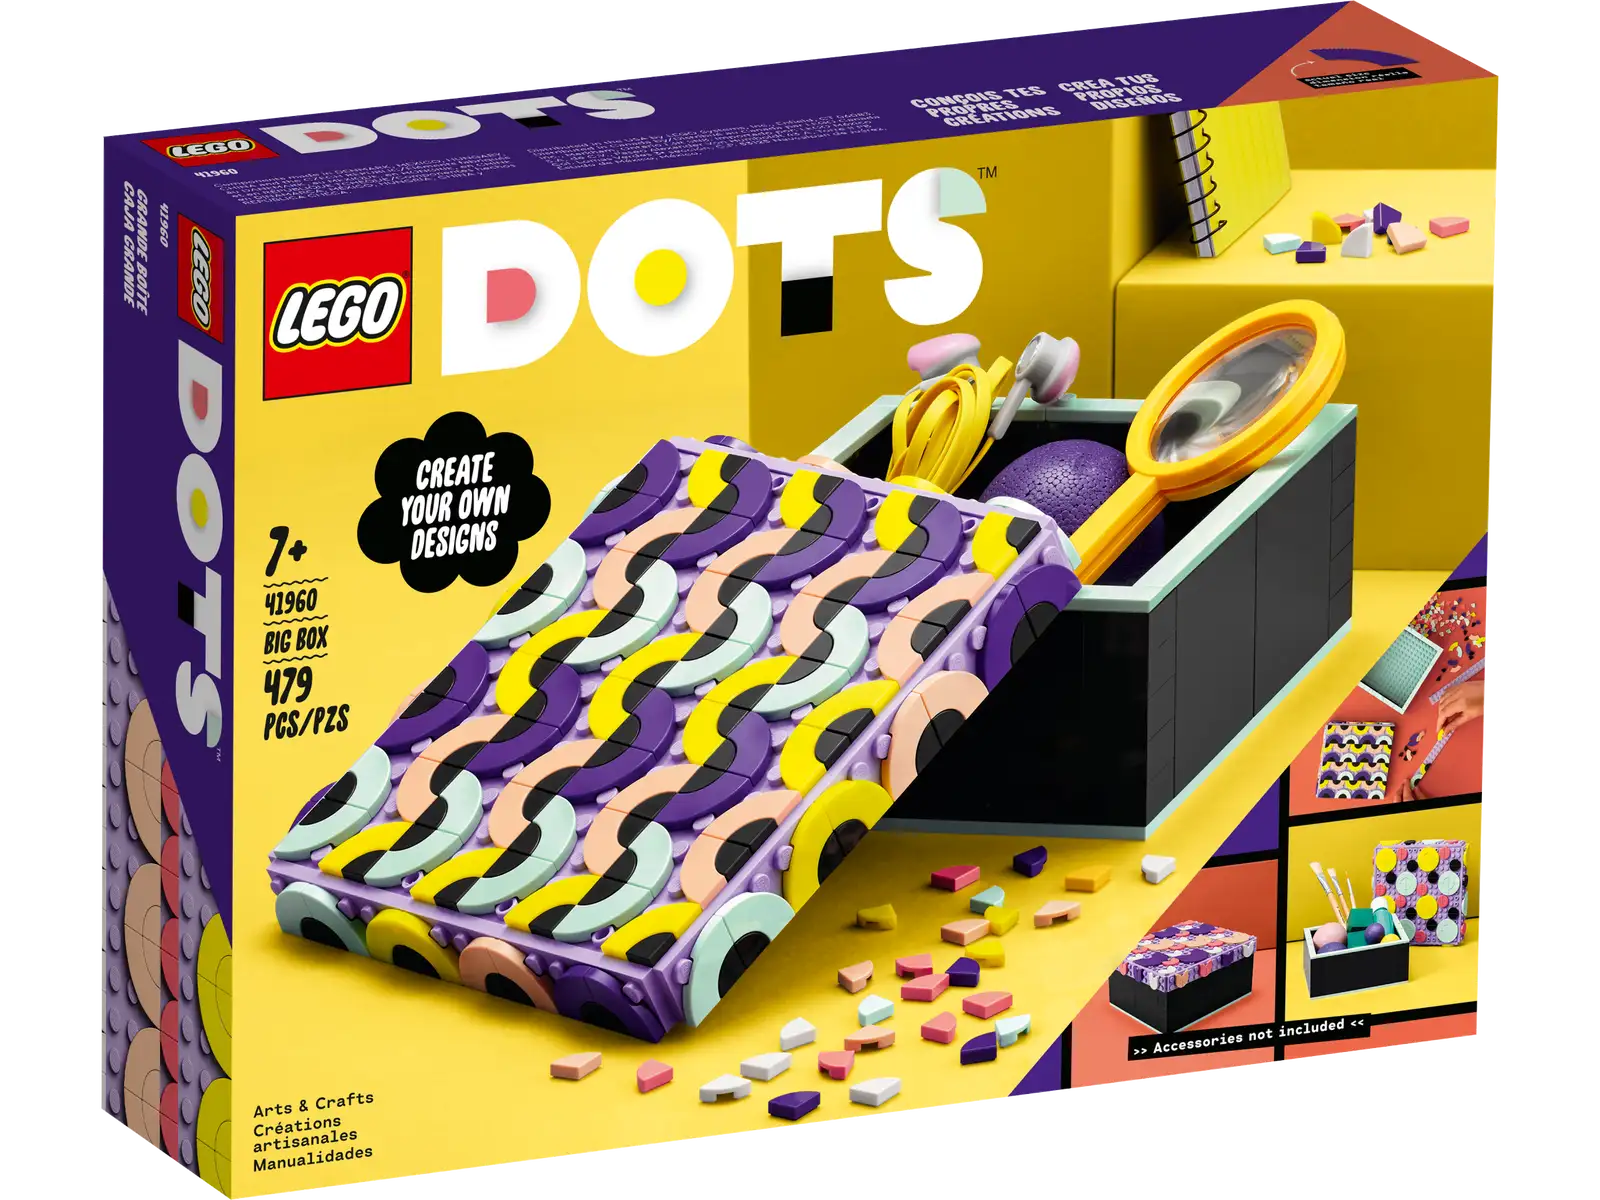 Looking for a fun, useful arts-and-crafts gift for ages 6 and up? Make any kid or crafts fan happy with this creative LEGO® DOTS Big Box (41960) kit! The set features a large black box and a removable lid, plus lots of bright neon-colored and toned-down pastel tiles for decorating. Assembly is an easy and intuitive process. Kids can put the box and lid together and then create endless designs on the top and sides of the lid to make it uniquely theirs. When they’re done decorating, they can store their treasures safely inside, add the lid and show off their stylish designs. Creative DIY storage DOTS sets introduce kids to the joy of LEGO play and creativity as they make and decorate the different sets. Anything goes with this clever storage box because the magic and control lie in a child’s imagination. DOTS sets are packed with possibilities to inspire imaginative play for creative kids. Make it, design it, use it – Surprise any kid or arts-and-crafts fan with this LEGO® DOTS Big Box (41960) craft kit. The creative fun begins when they open the package and start making the box Endless design possibilities – Kids can boost their imagination and creative skills as they play with a kit featuring a box and a removable, design-ready, black lid, plus neon and pastel tiles Creativity in a kit – This set works on its own for quick, imaginative originality. Kids can also use anyof the LEGO® DOTS Extra DOTS bags or boxes (sold separately) to expand their designs Arts-and-crafts treat for ages 6+ – Any creative DIY fan will love this customizable kit. The storage box, removable lid and colorful tiles will make a fun gift for kids with a passion for crafts Room for treasures – the box measures over 5.5 in. (14 cm) square and over 2.5 in. (7 cm) high, so there’s lots of storage space inside and room on the lid for kids to get creative Decorating starts quickly – Easy-to-follow inspiration in the packaging makes creating a snap, with tiles in pastel and neon colors so kids can really show off their passion for design Design confidence and freedom – This LEGO® DOTS kit represents open creativity. The easy-to-assemble box and lid offer endless chances to build children’s ingenuity and poise through fun Unlimited play and self-expression – LEGO® DOTS sets give kids the joy of LEGO play through creating and personalizing their own jewelry or room decoritems Uncompromising quality – Ever since 1958, LEGO® components have met stringent industry standards to ensure they connect consistently Safety first – LEGO® components are dropped, heated, crushed, twisted and analyzed to make sure this LEGO DOTS Big Box set meets rigorous global safety standards